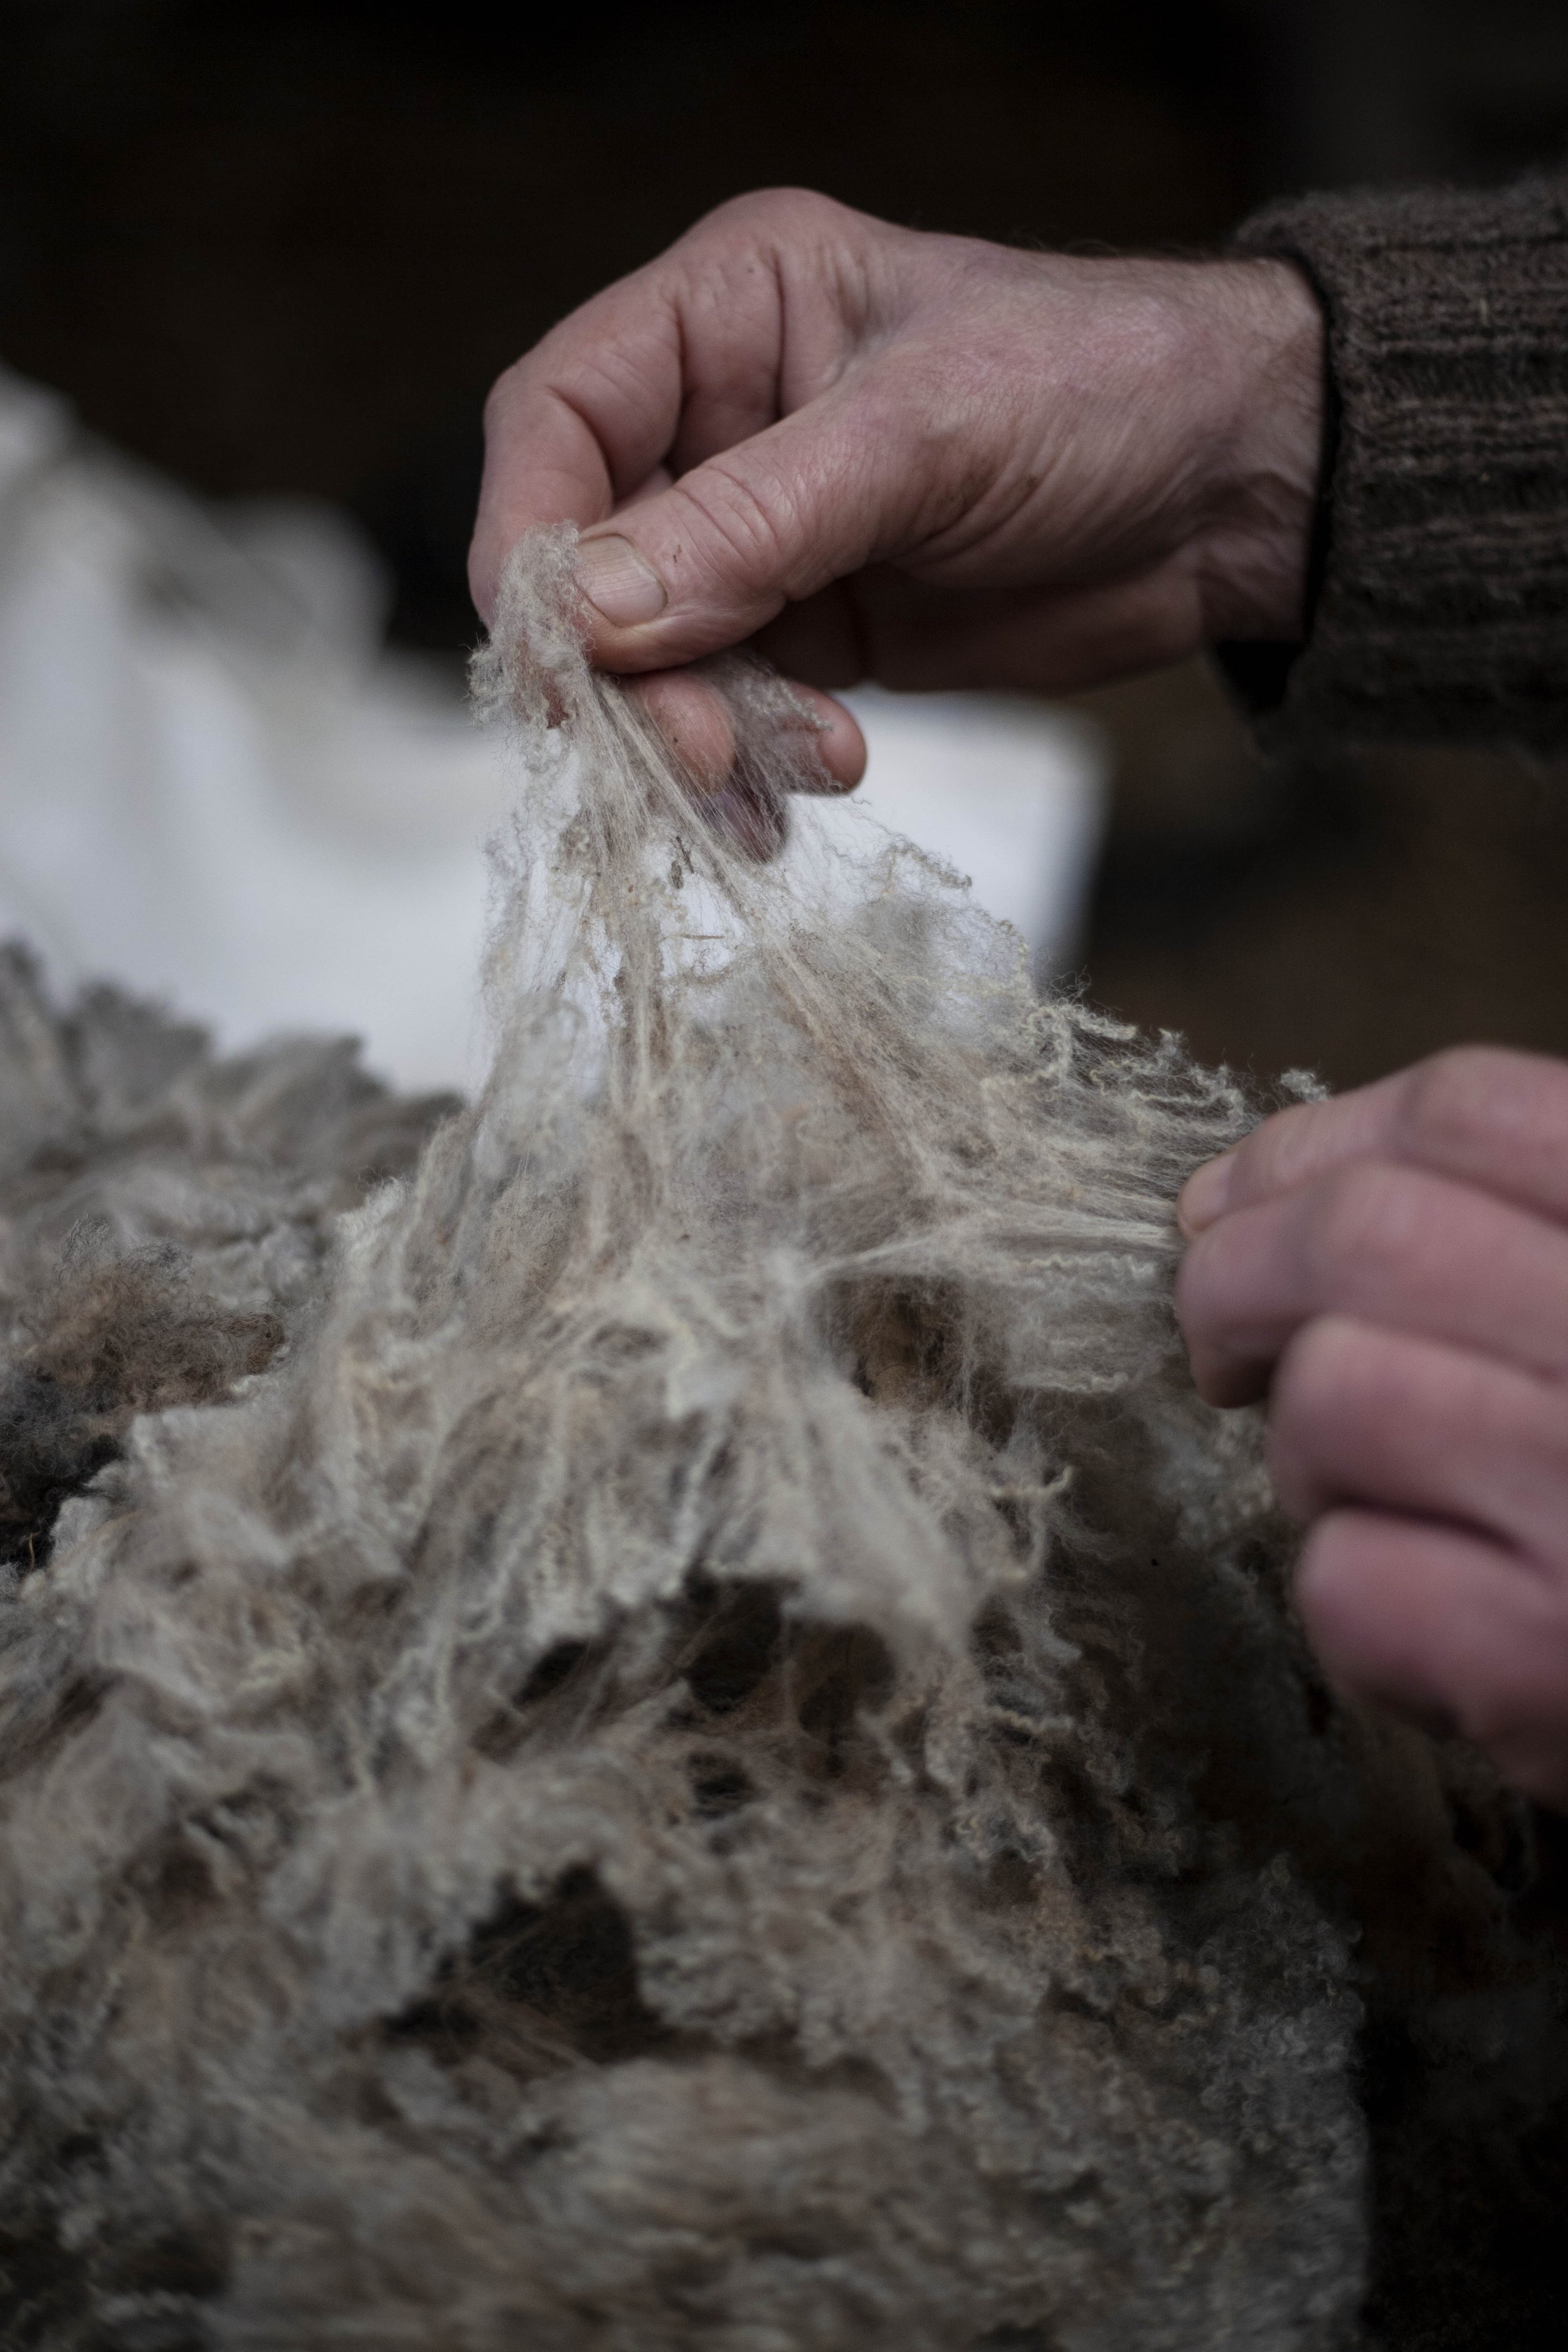 Photograph by Hatty Frances Bell of hands in fleece at Middle Campscott Farm 